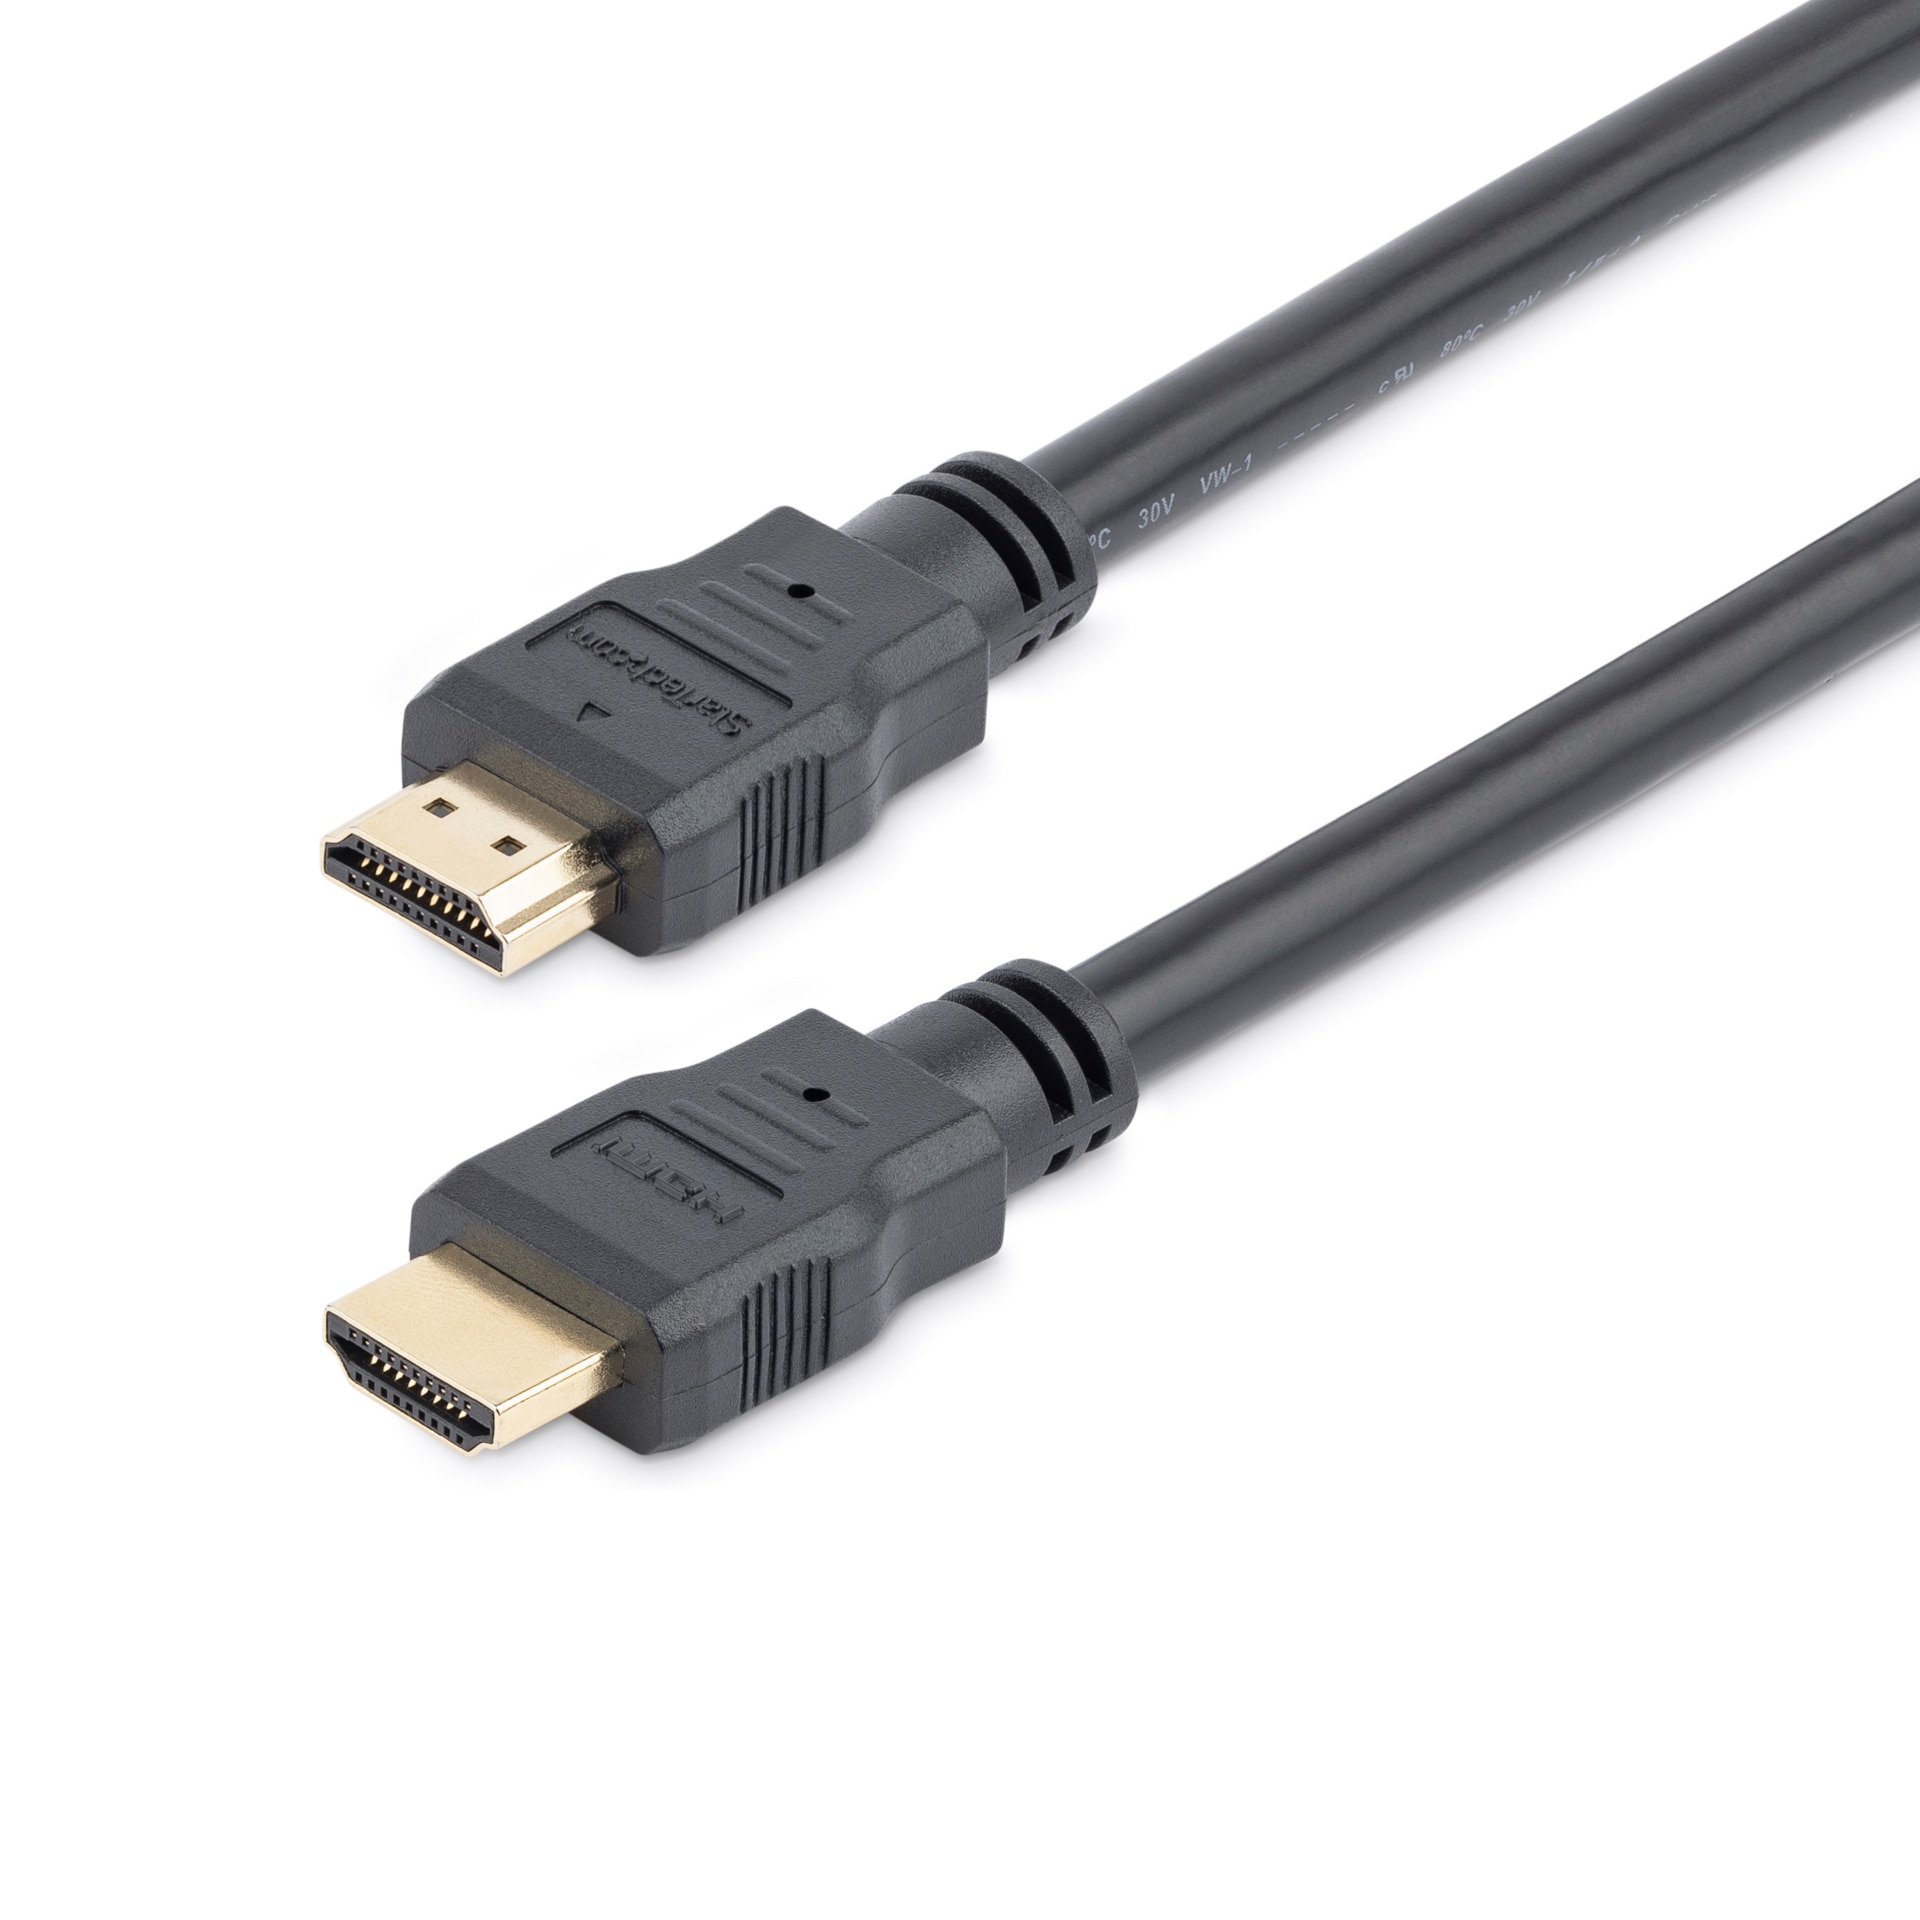 StarTech.com 3ft (1m) HDMI Cable - 4K High Speed HDMI 1.4 Cable w/ Ethernet